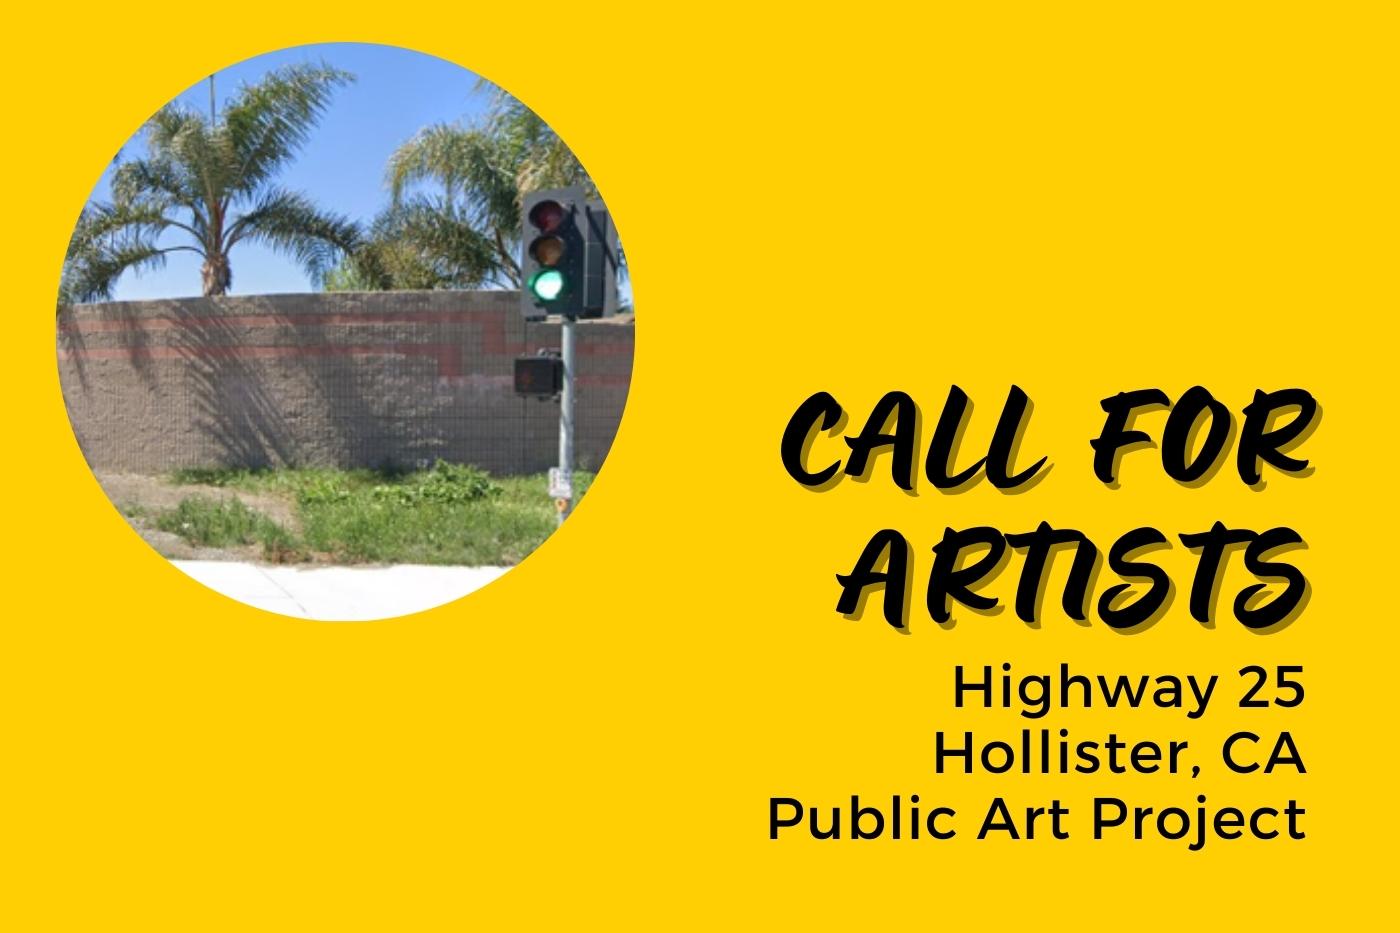 Highway 25 Hollister, CA Call for Artists